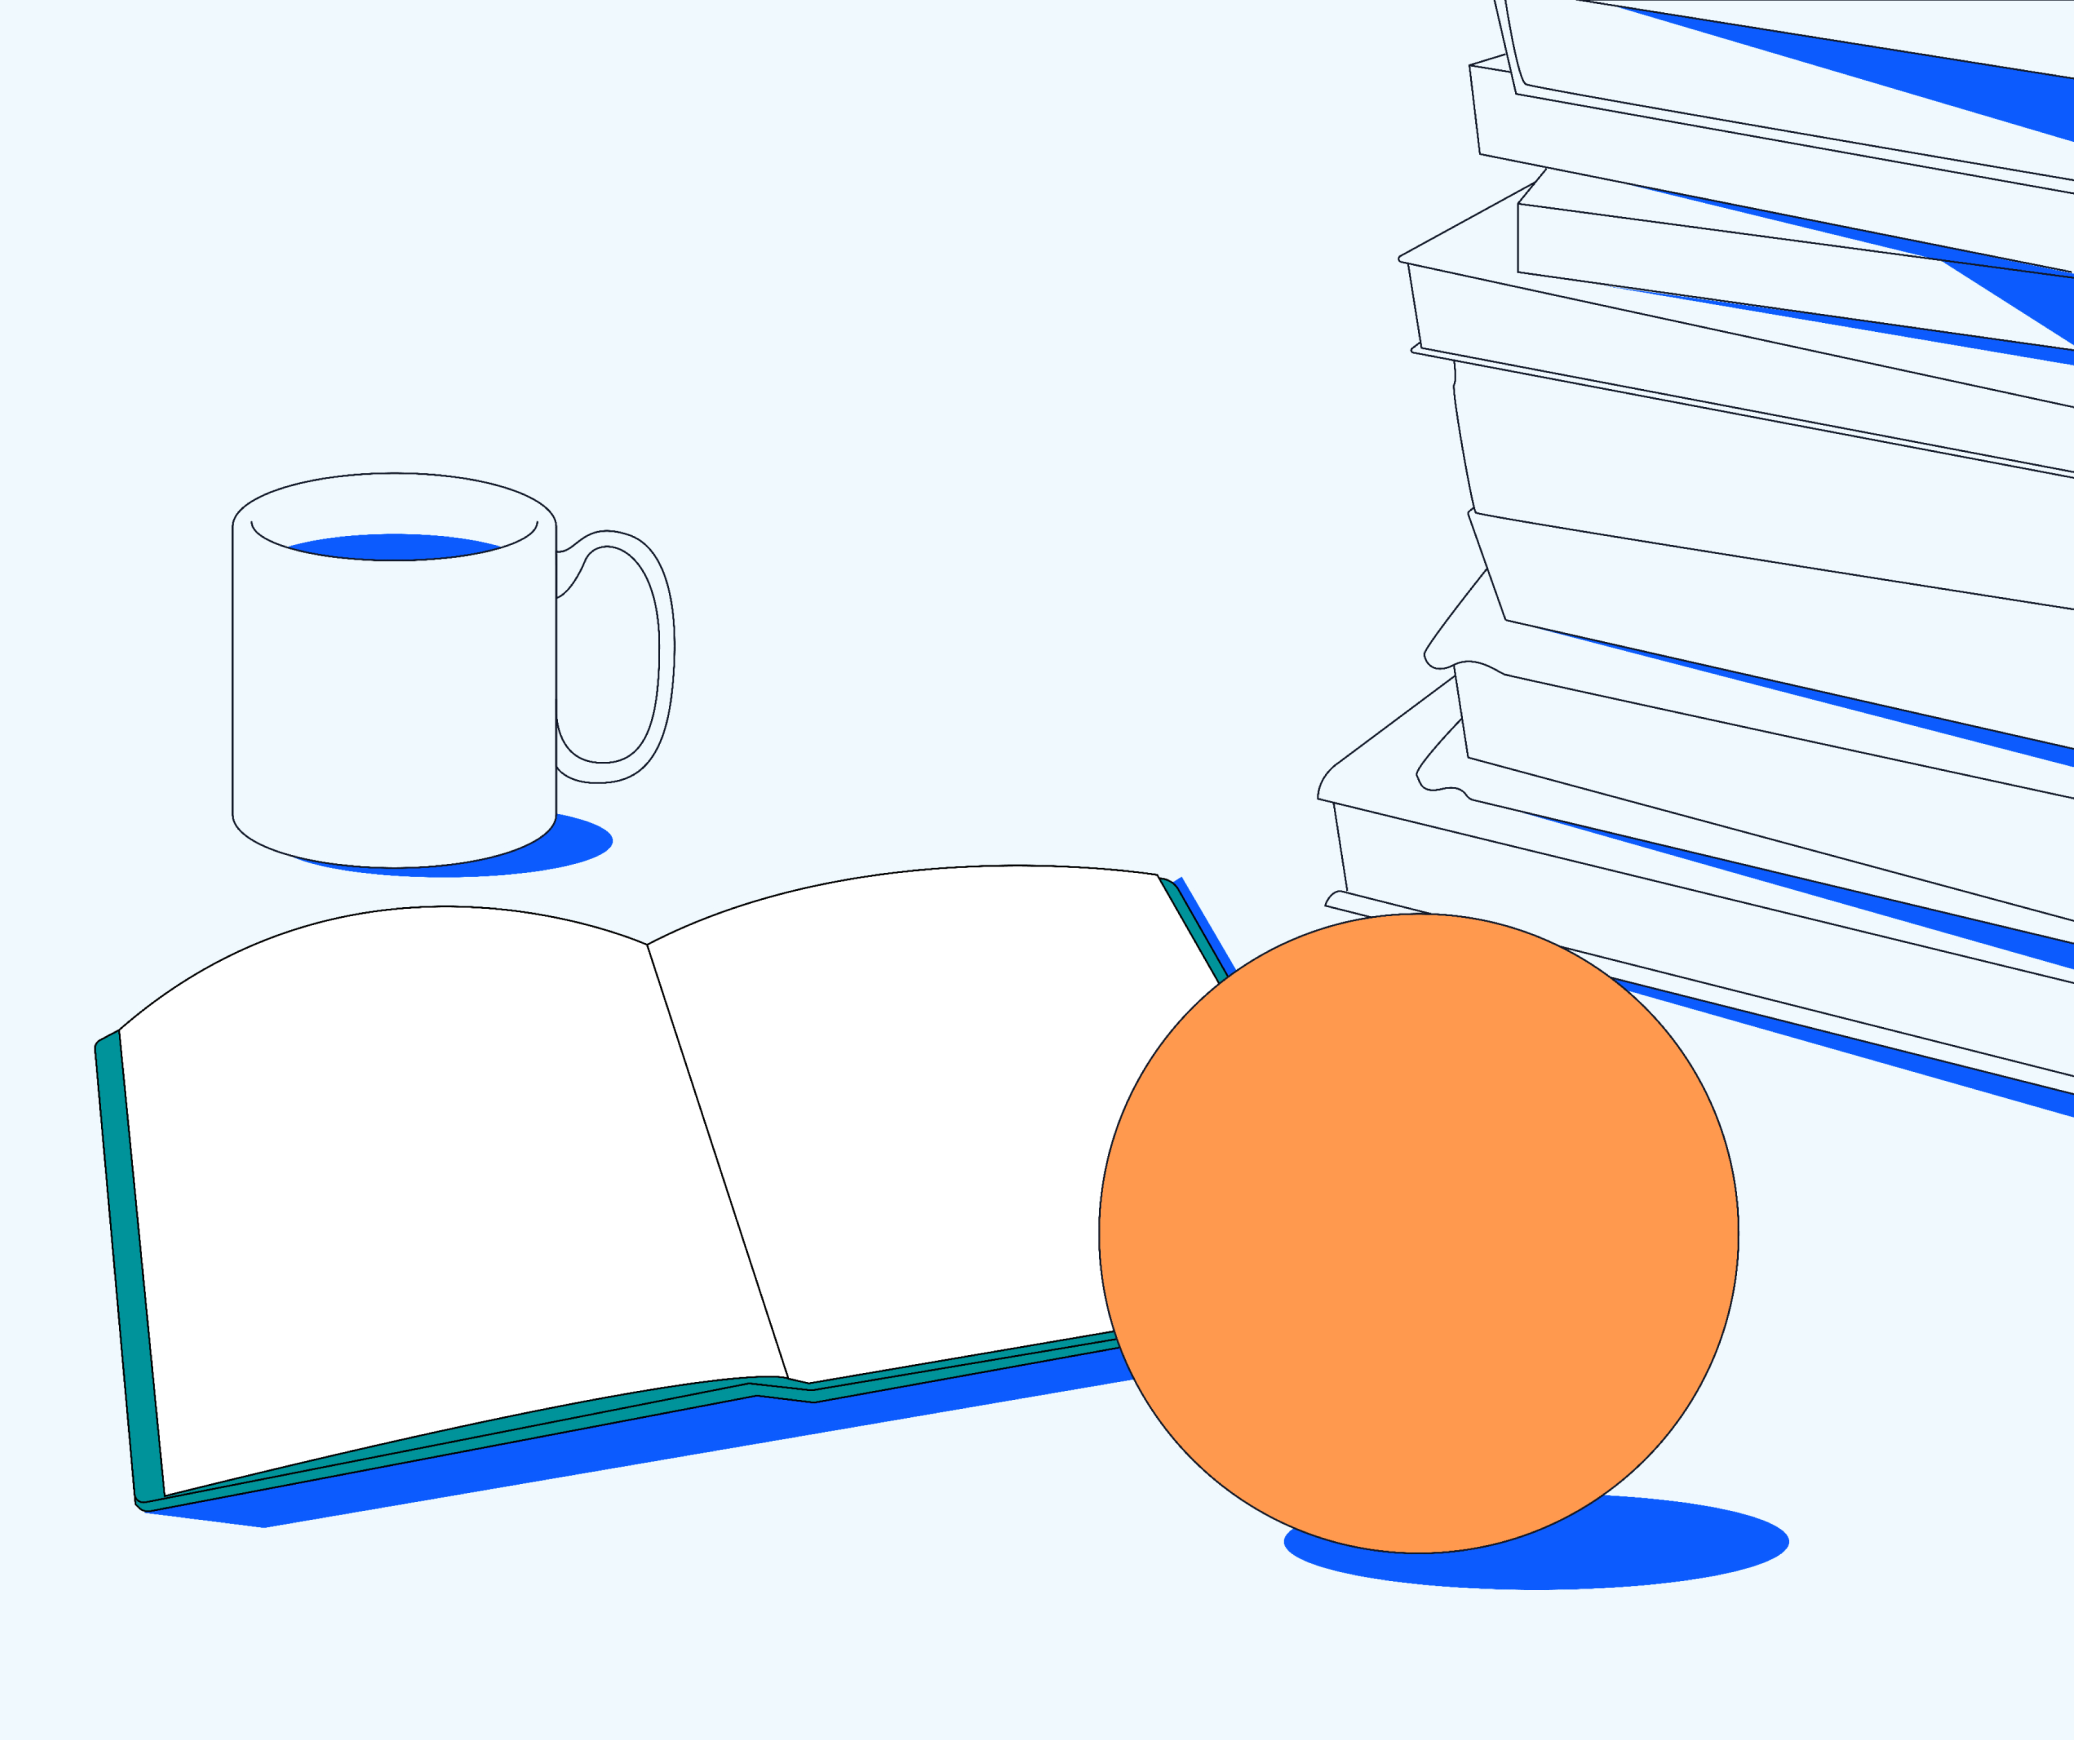 An open book sits beside stack of UX books, an orange ball and coffee cup